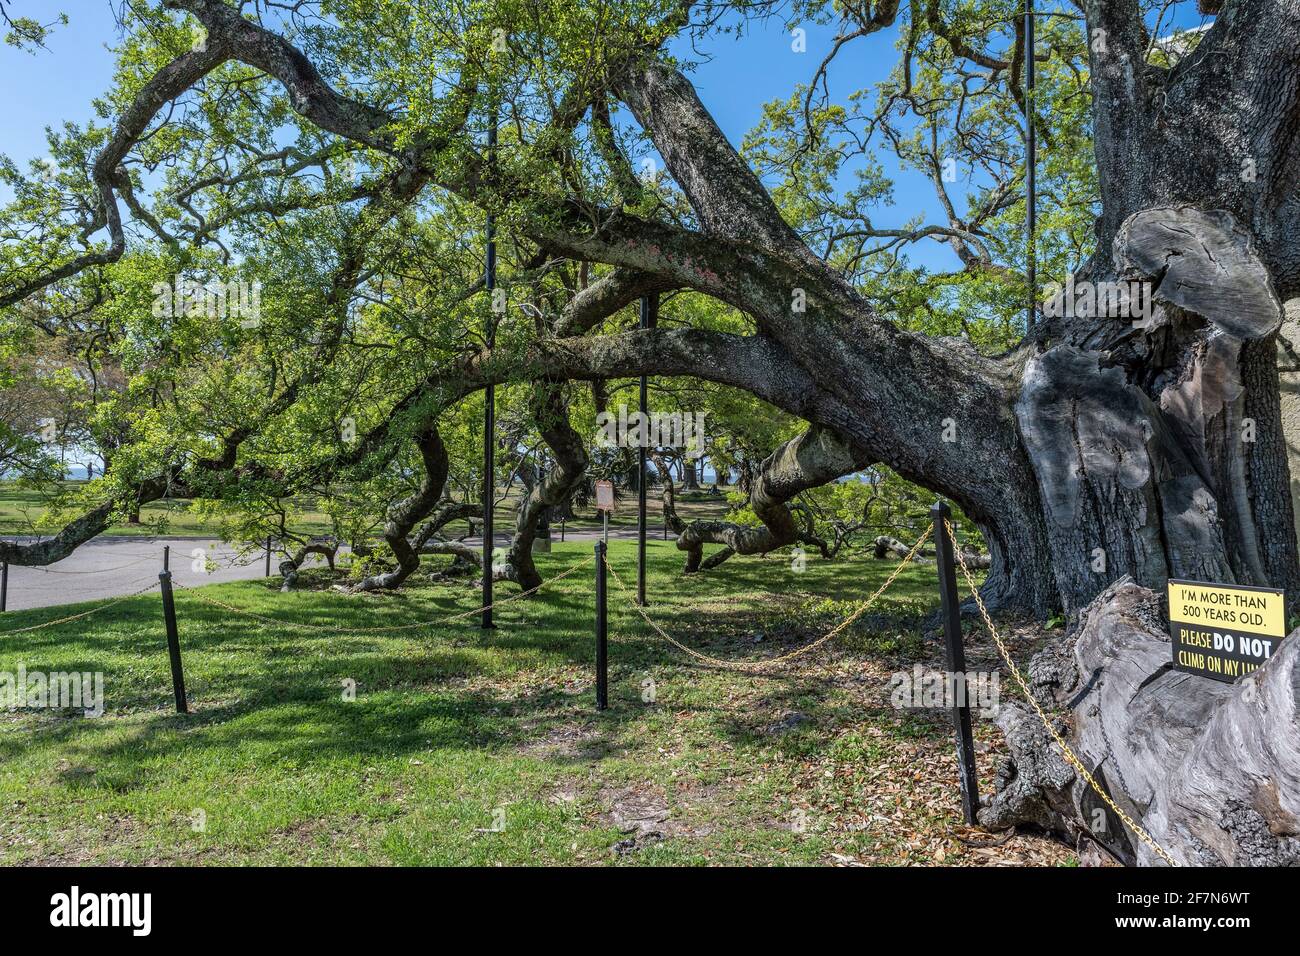 Historic Friendship Oak Tree, southern live oak said to be 500 years old on the campus of the University of Southern Mississippi, Long Beach, MS, USA. Stock Photo